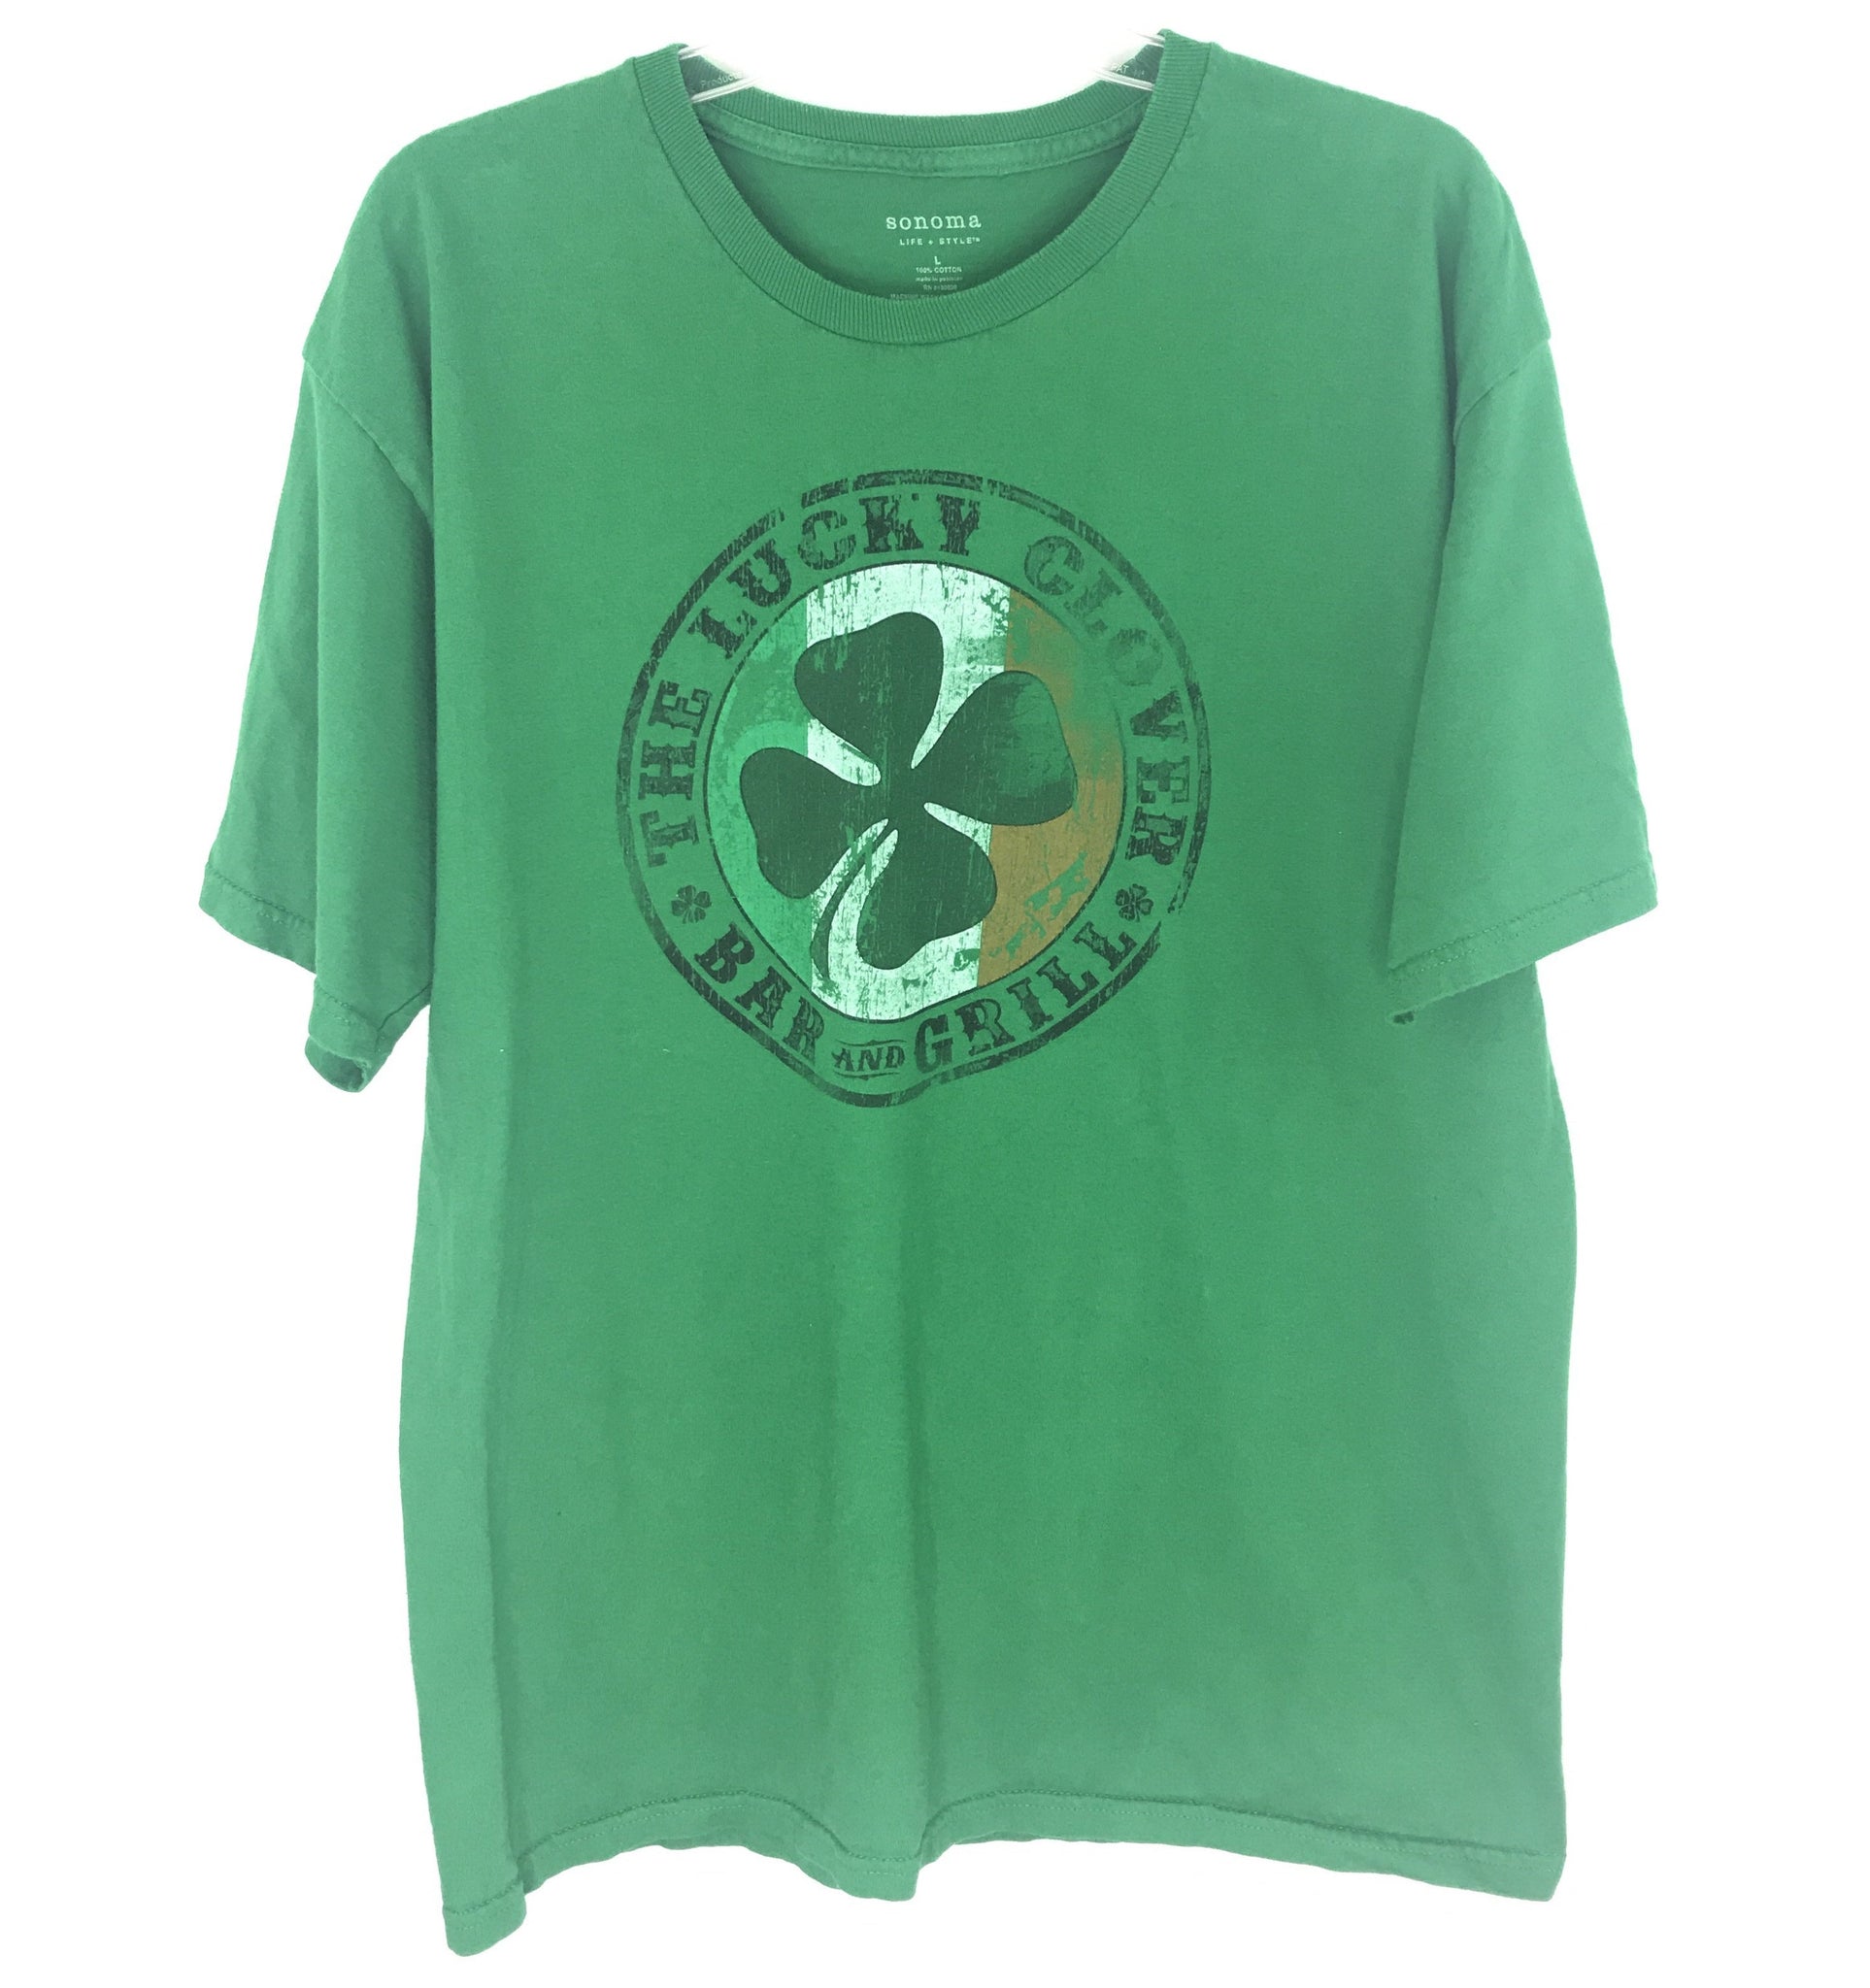 Sonoma Mens Graphic T-Shirt - The Lucky Clover Bar And Grill - Green Size Large